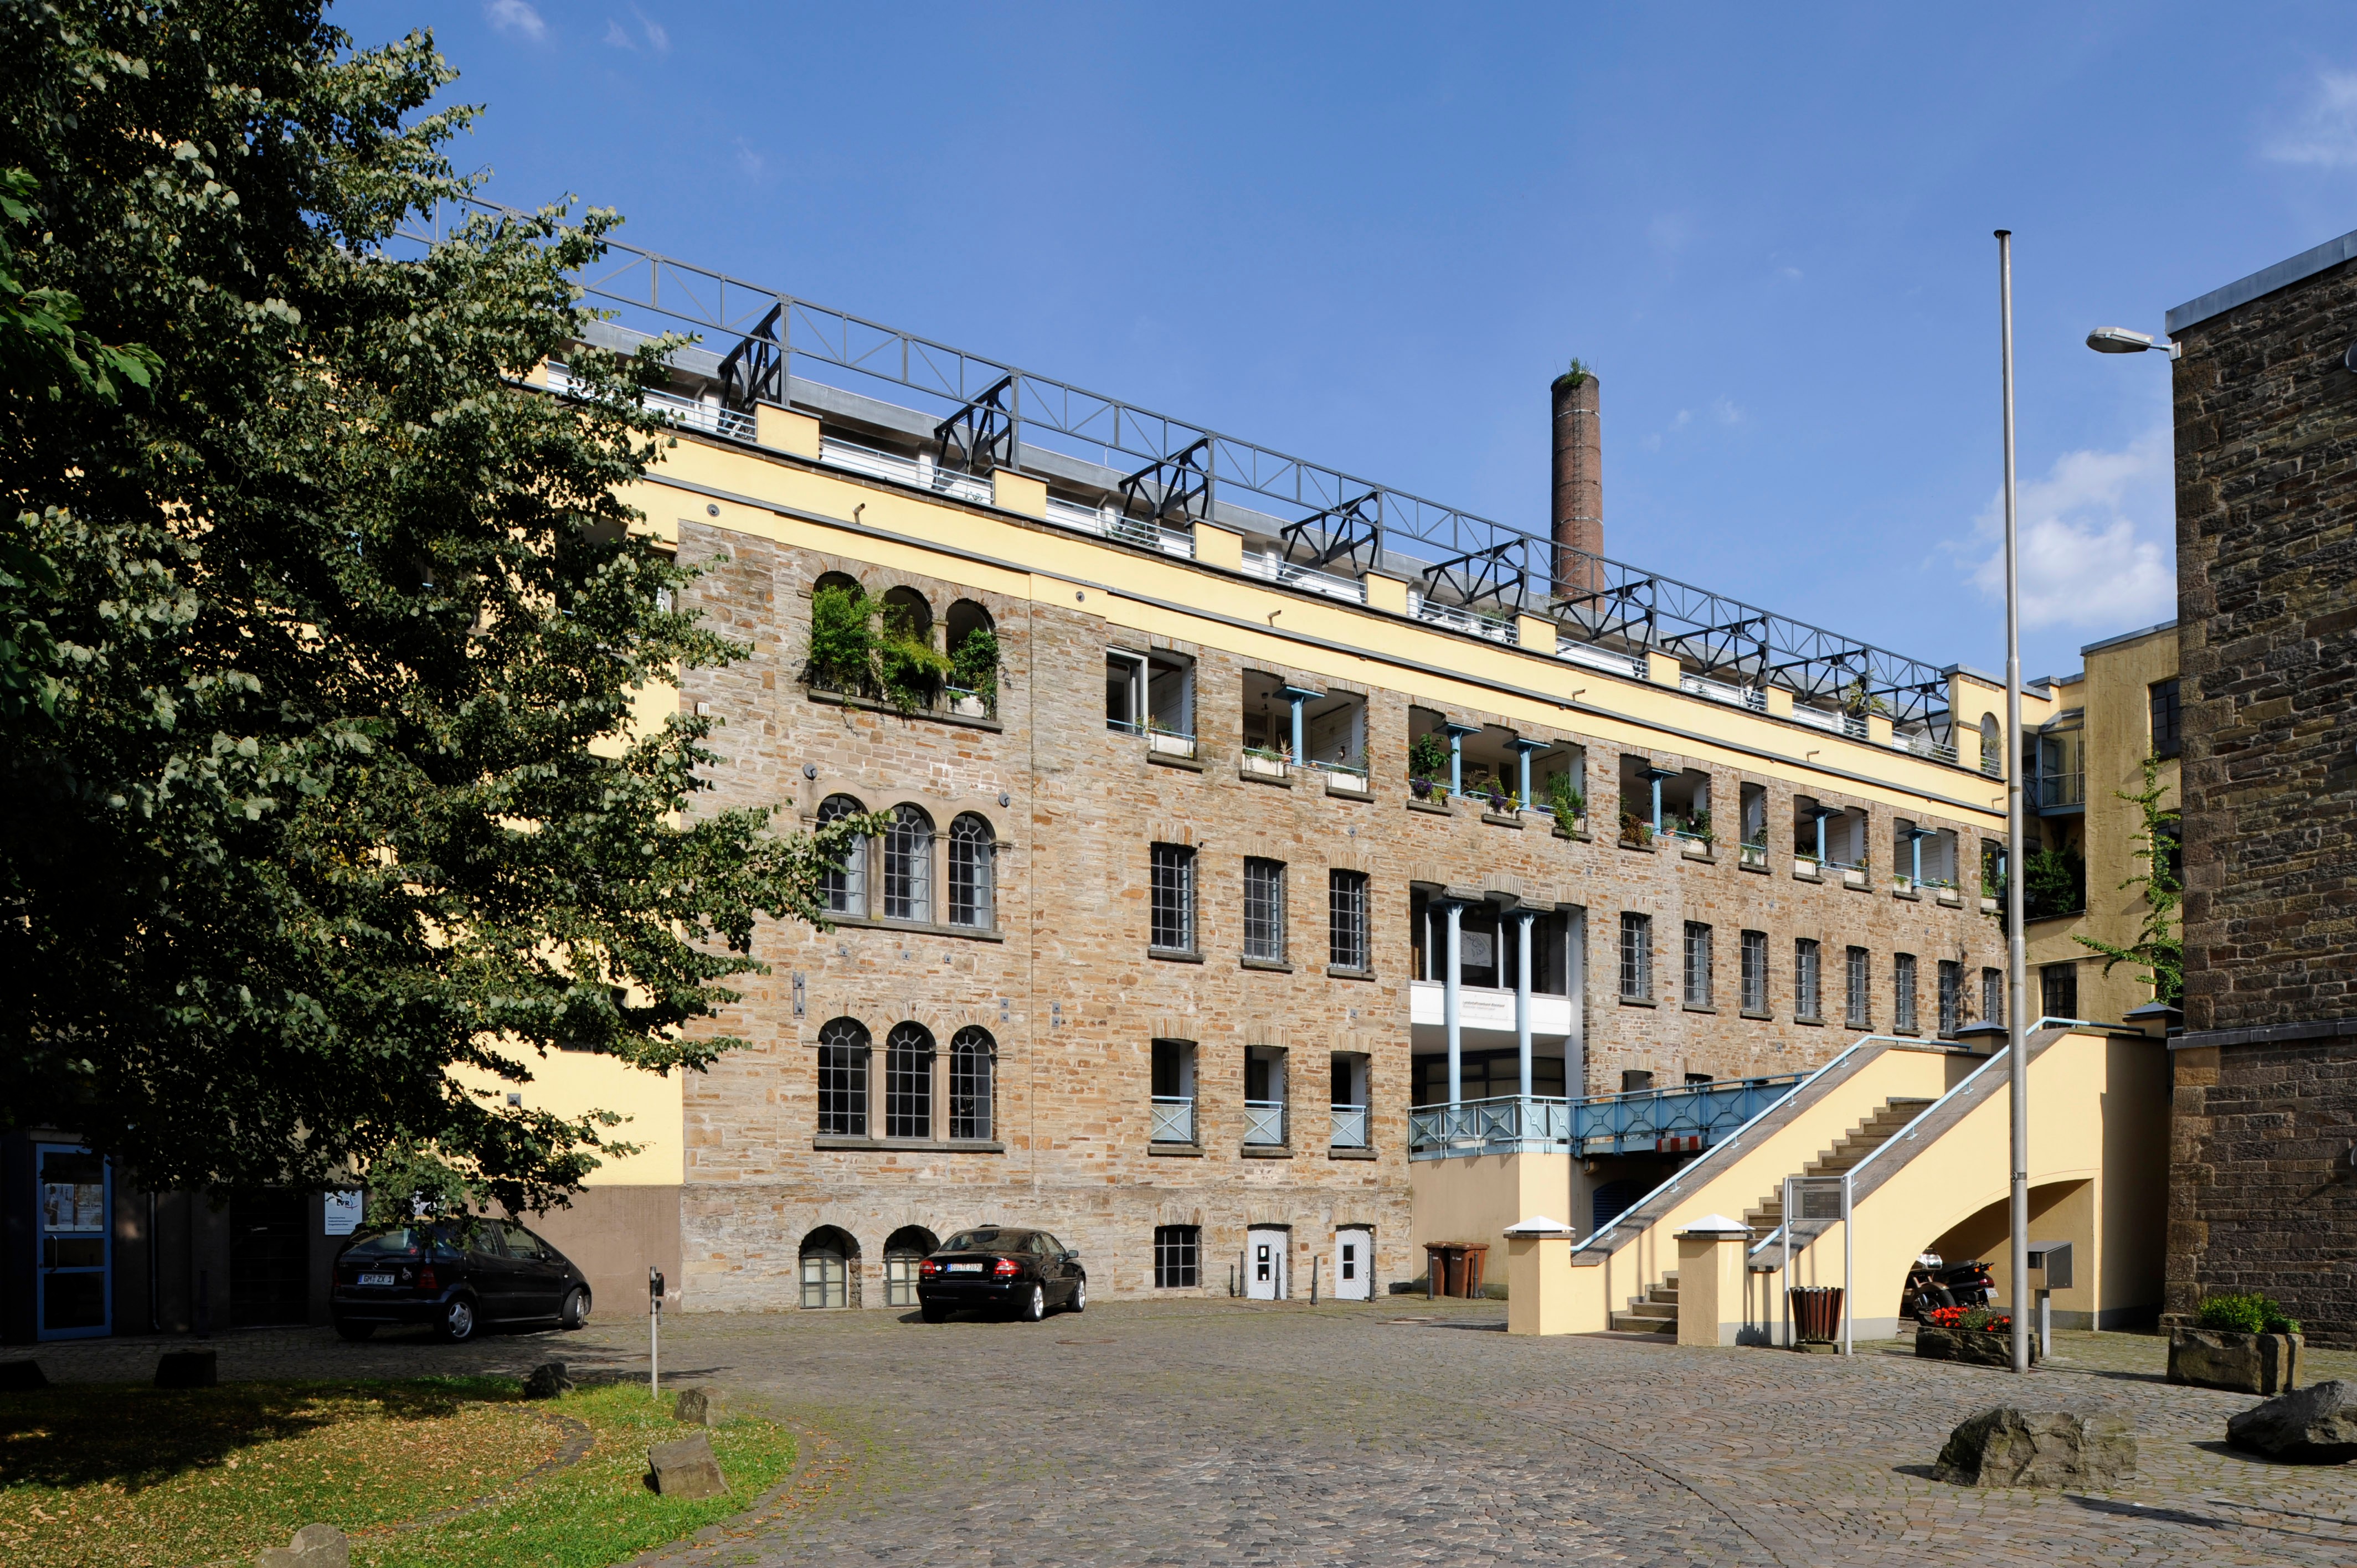 The doubling mill building belongs to the Ermen & Engels listed cotton spinning mill which was set up in 1837 by Friedrich Engels sen. Today it is the Engelskirchen site of the LVR-Industriemuseum with its permanent exhibition “Unter Spannung – Dem Strom auf der Spur” (With the current – on the trail of electricity).